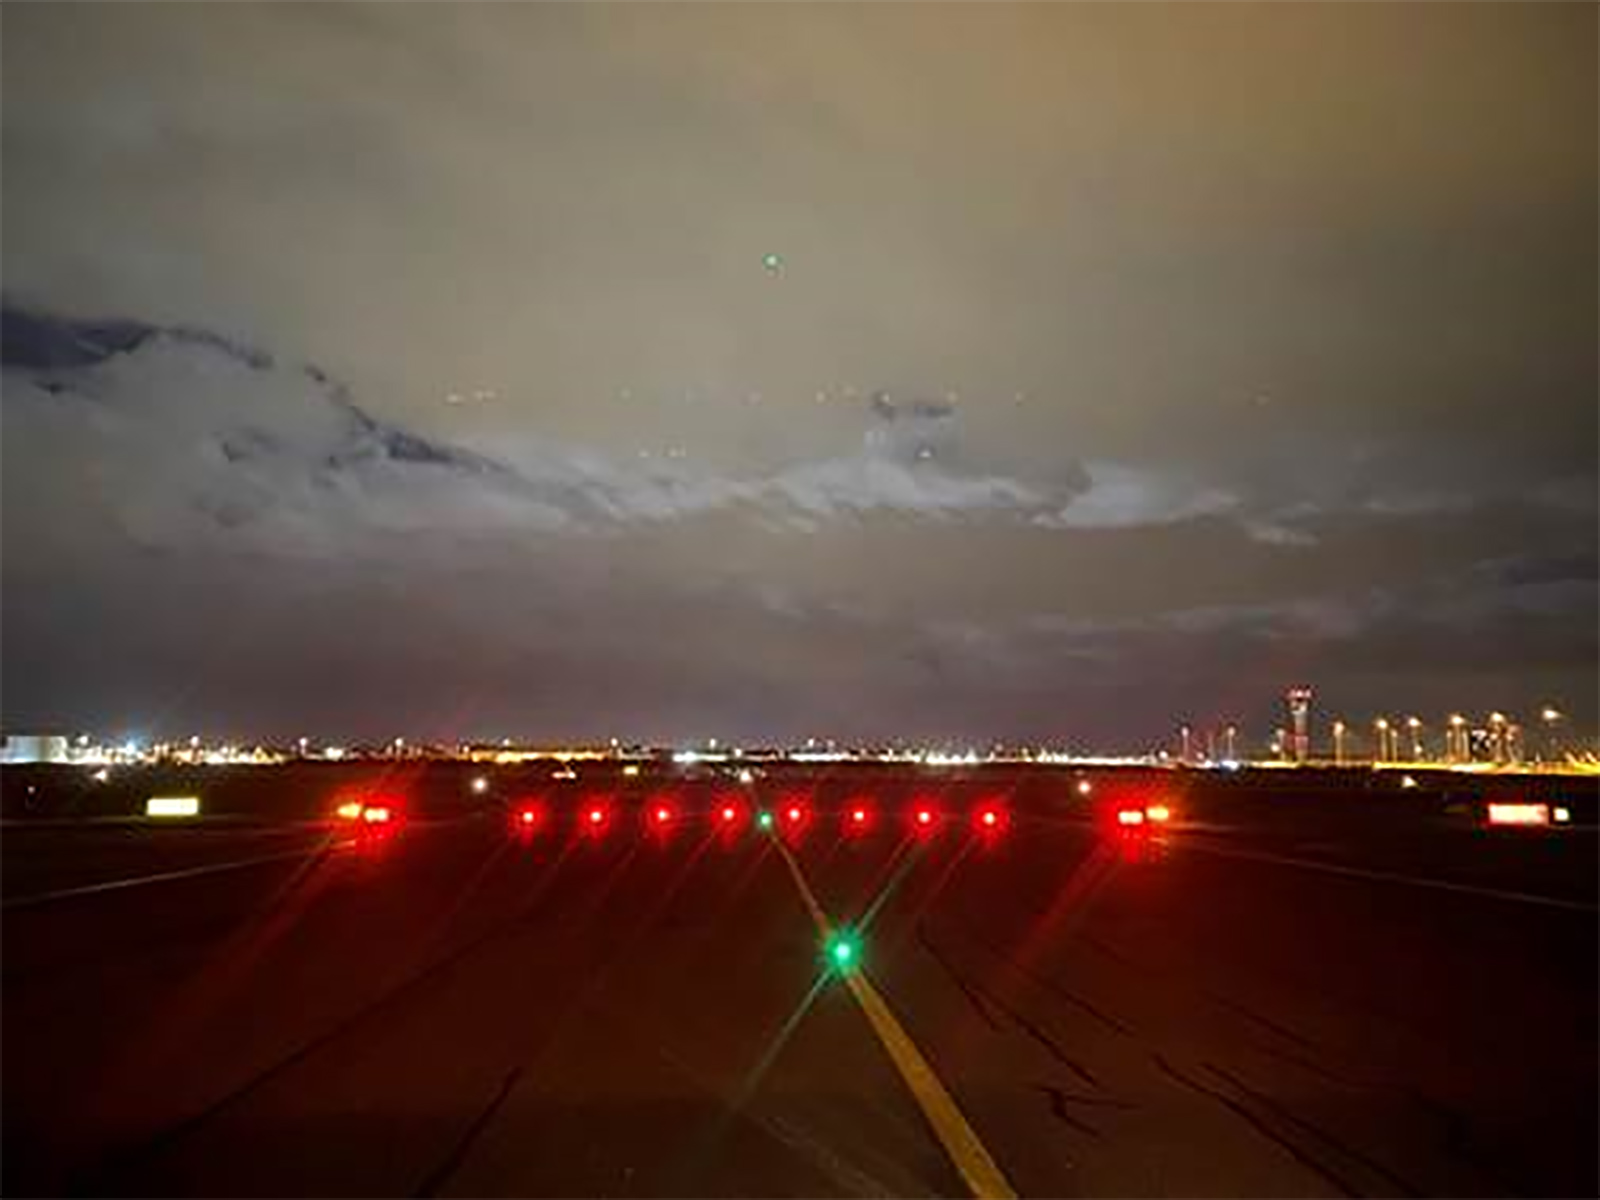 Stop Bars in action on Brisbane Airport's existing runway